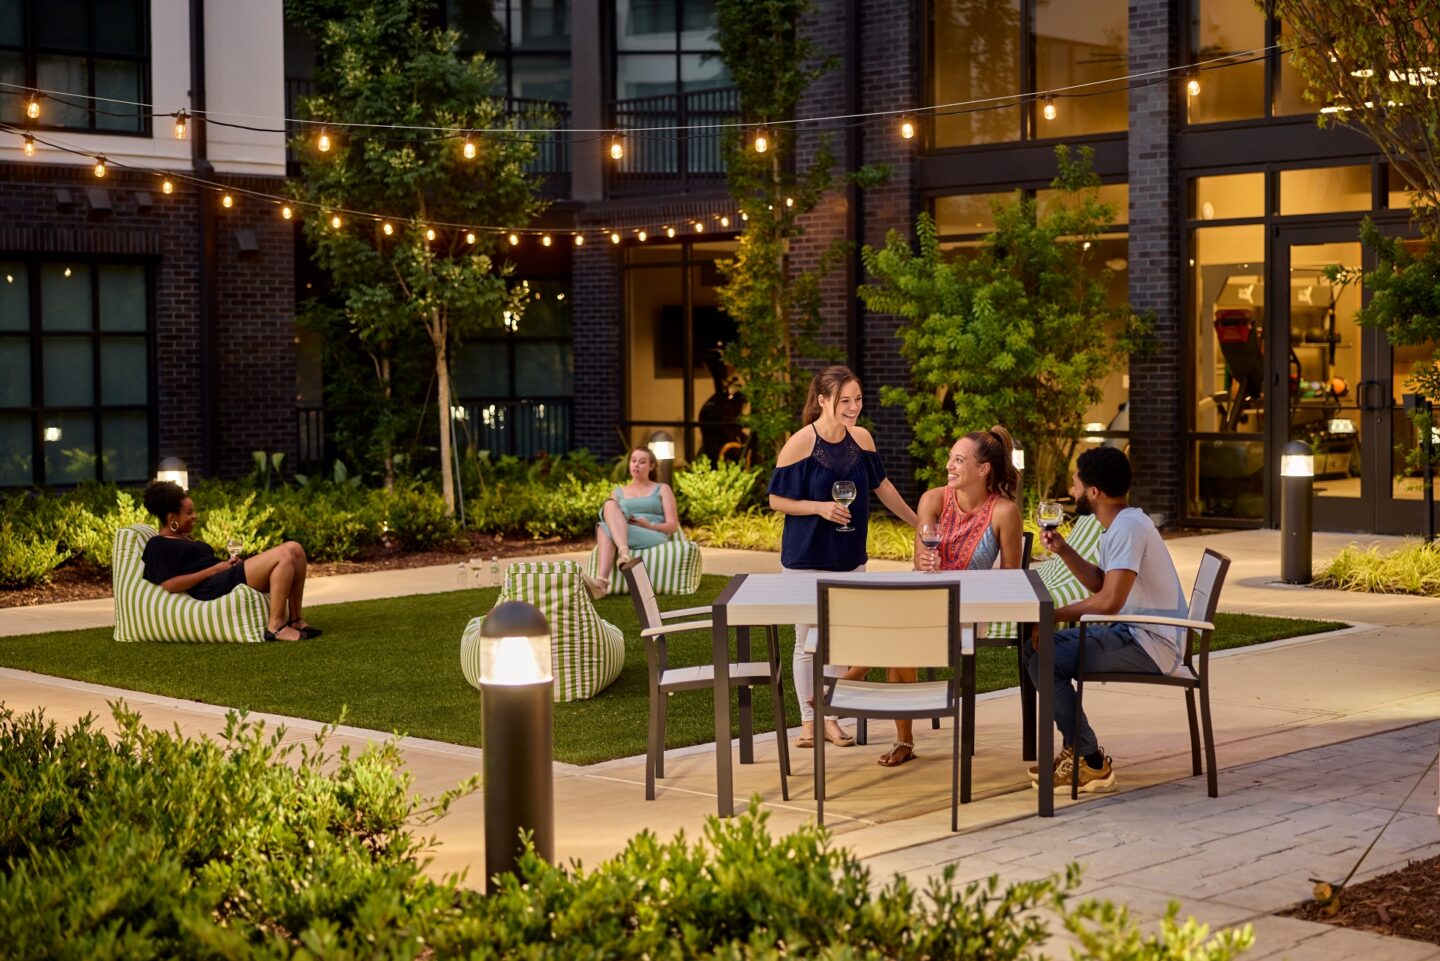 friends gathering in outdoor apartment community space